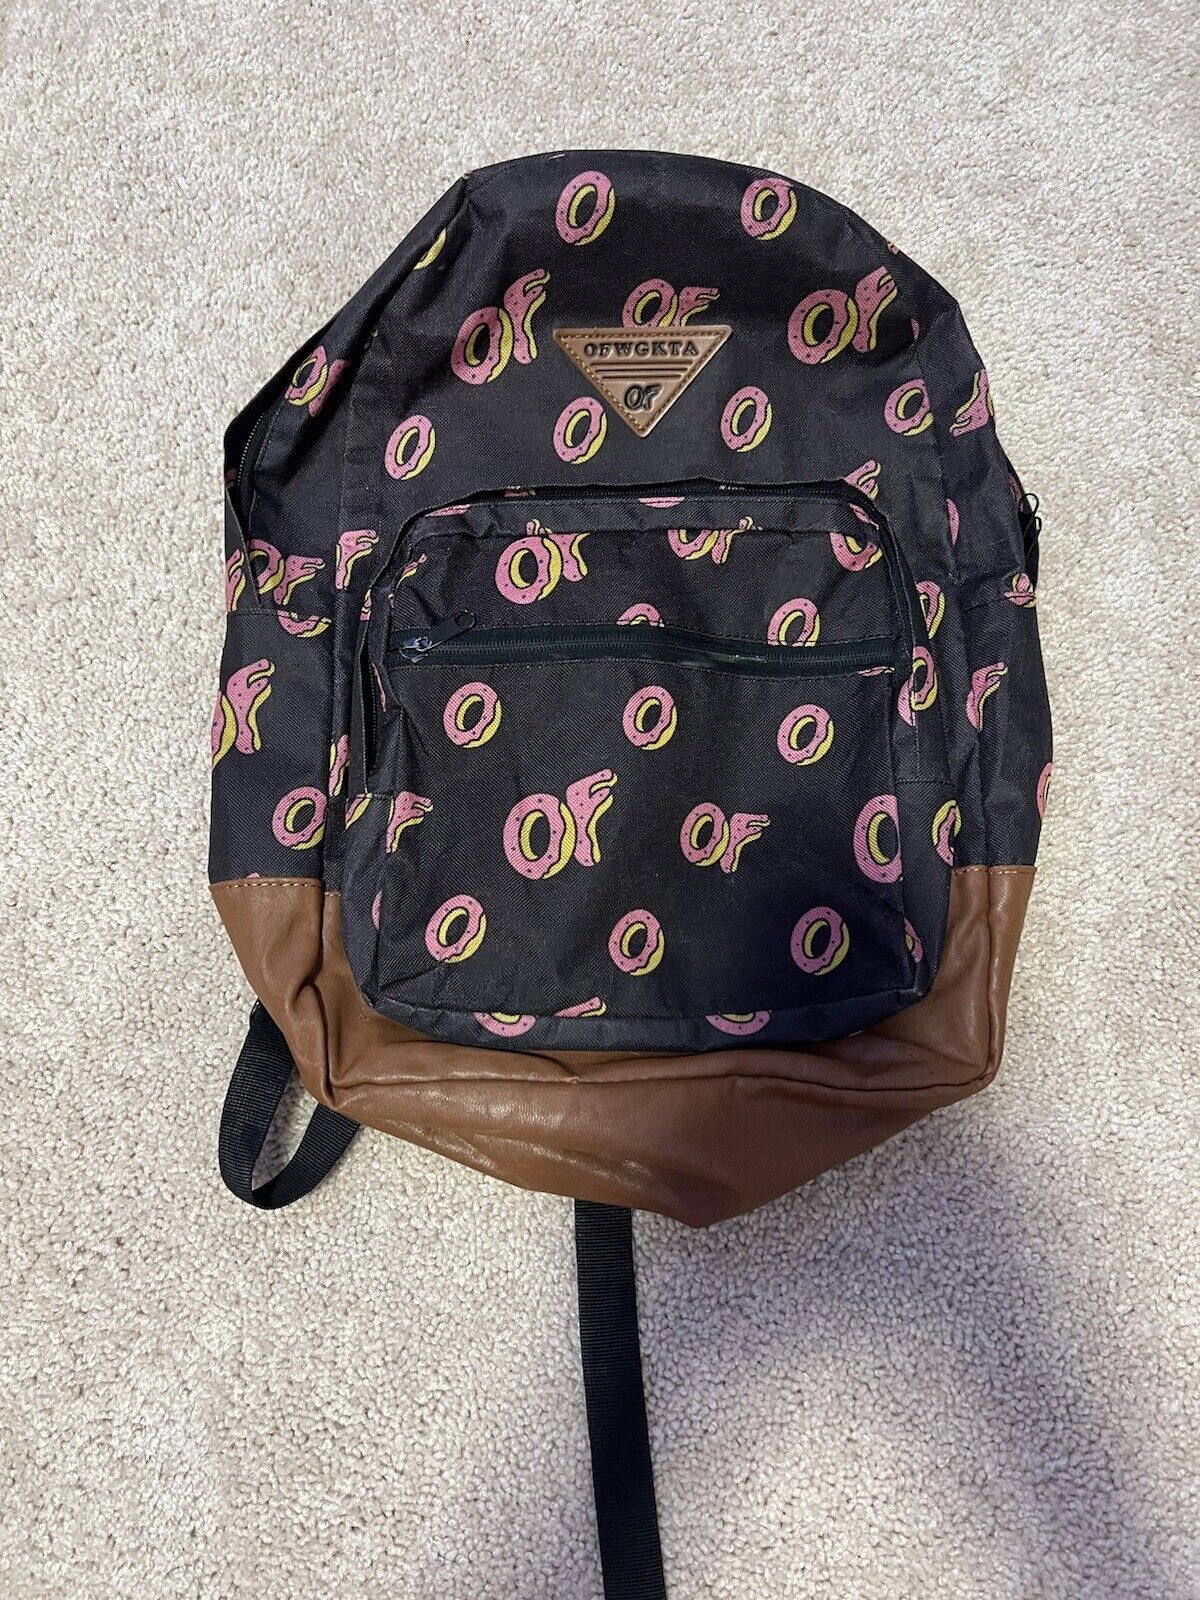 Odd Future Donut All Over Print Pink Black Backpack Tyler The Creator